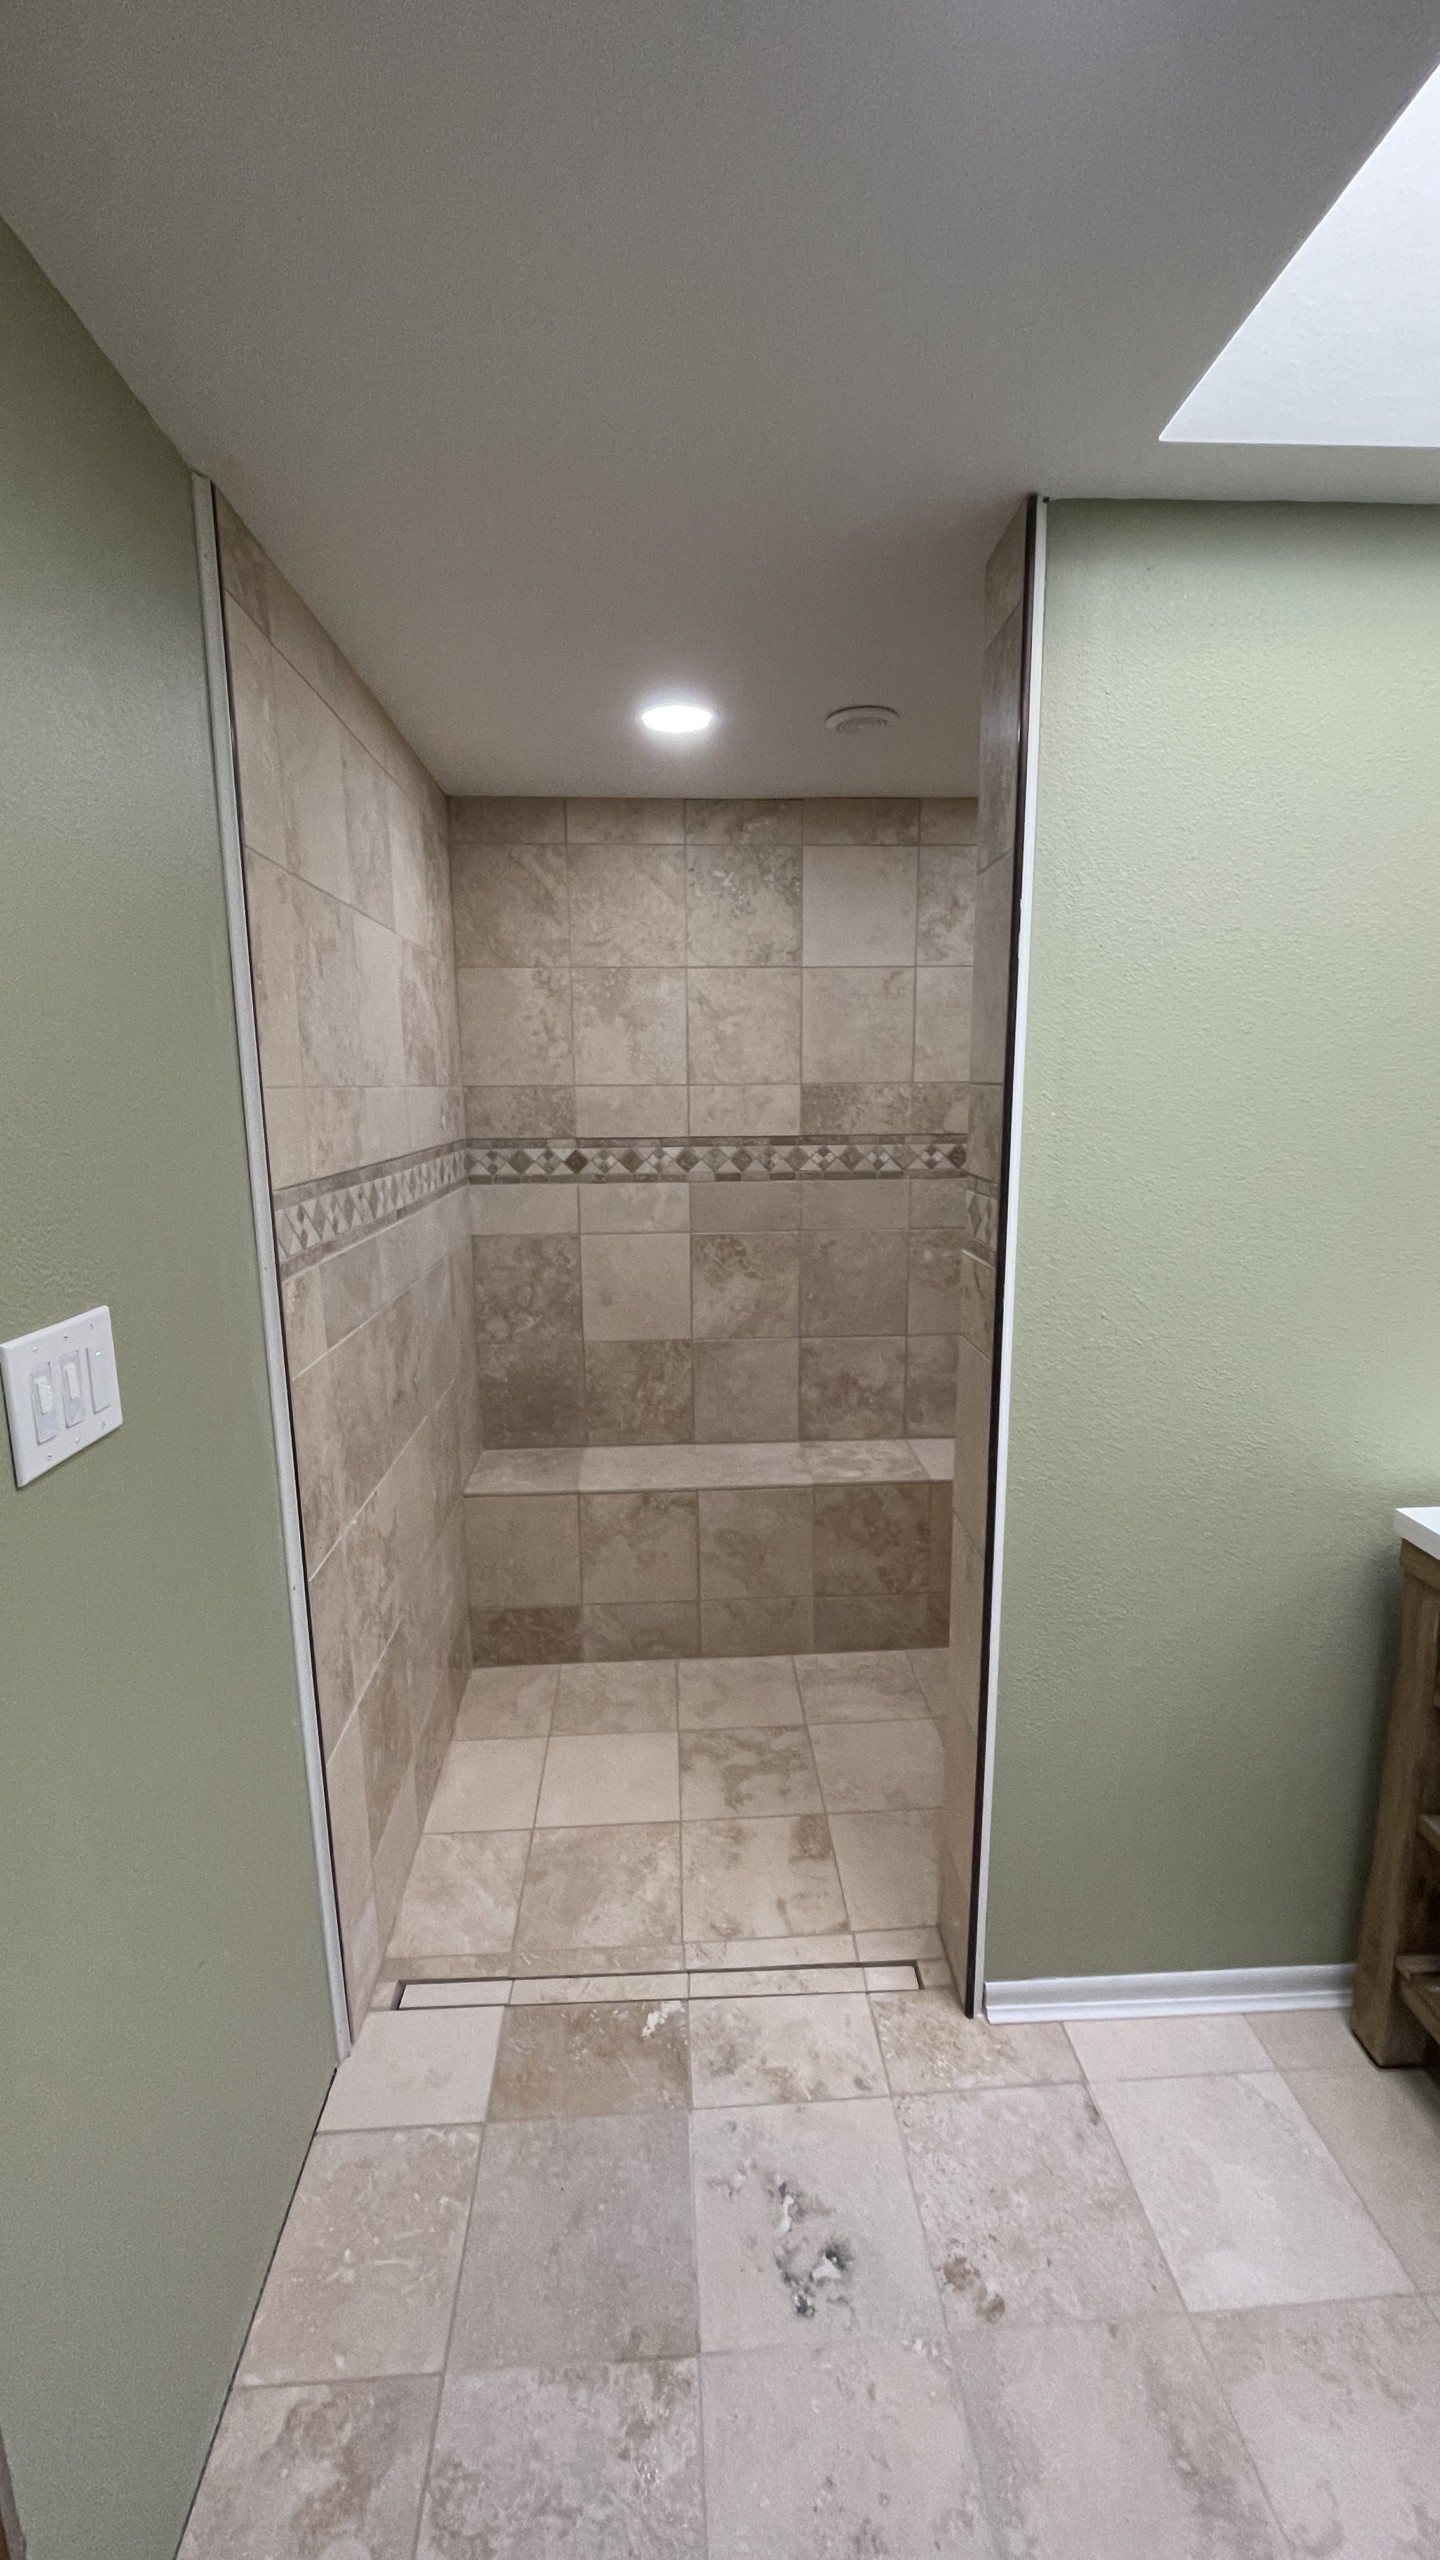 Looking into the finished shower.